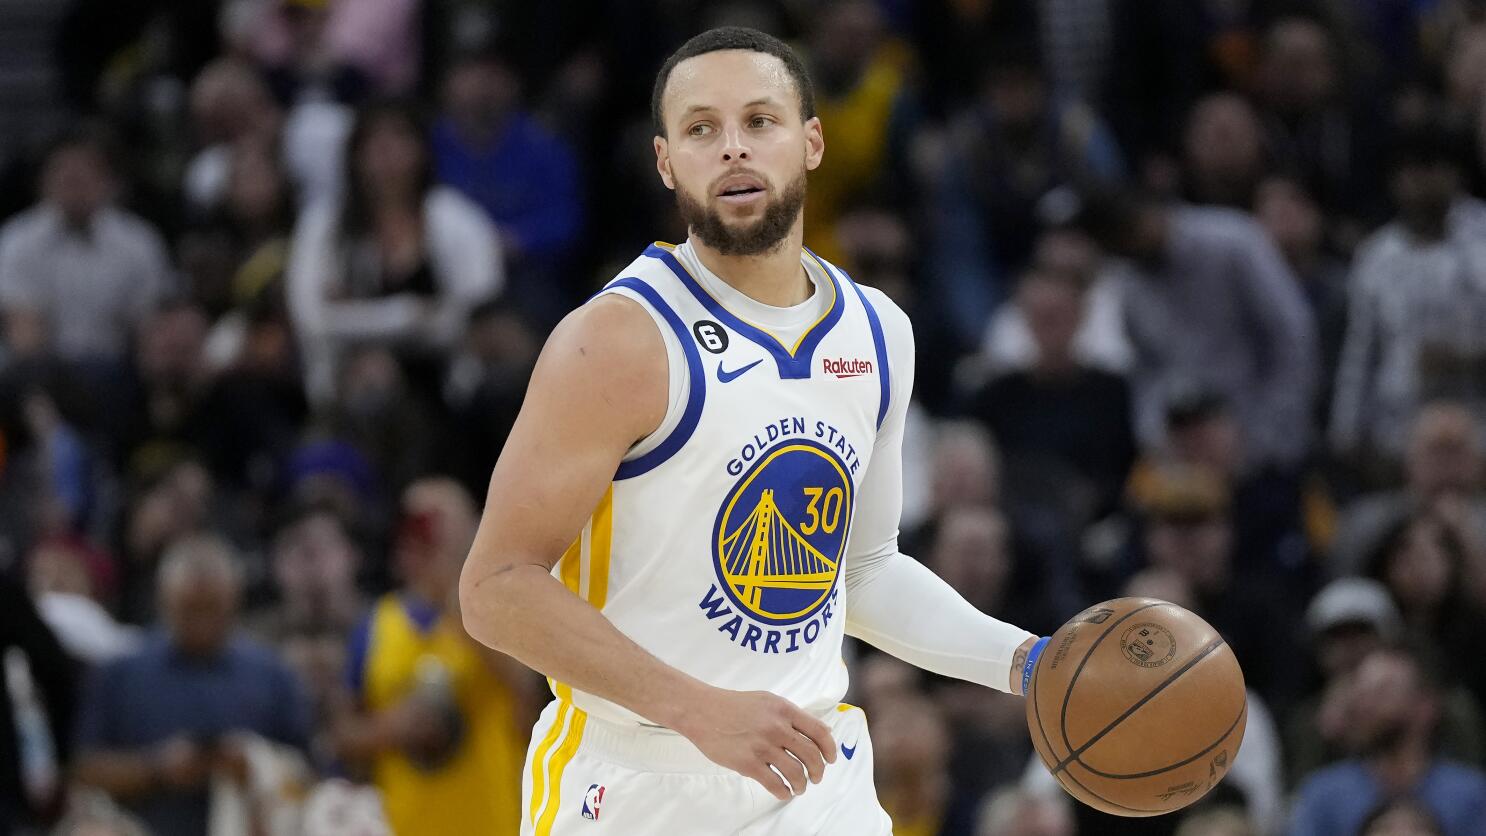 Basketball Forever on Instagram: Steph Curry is the 2022 NBA